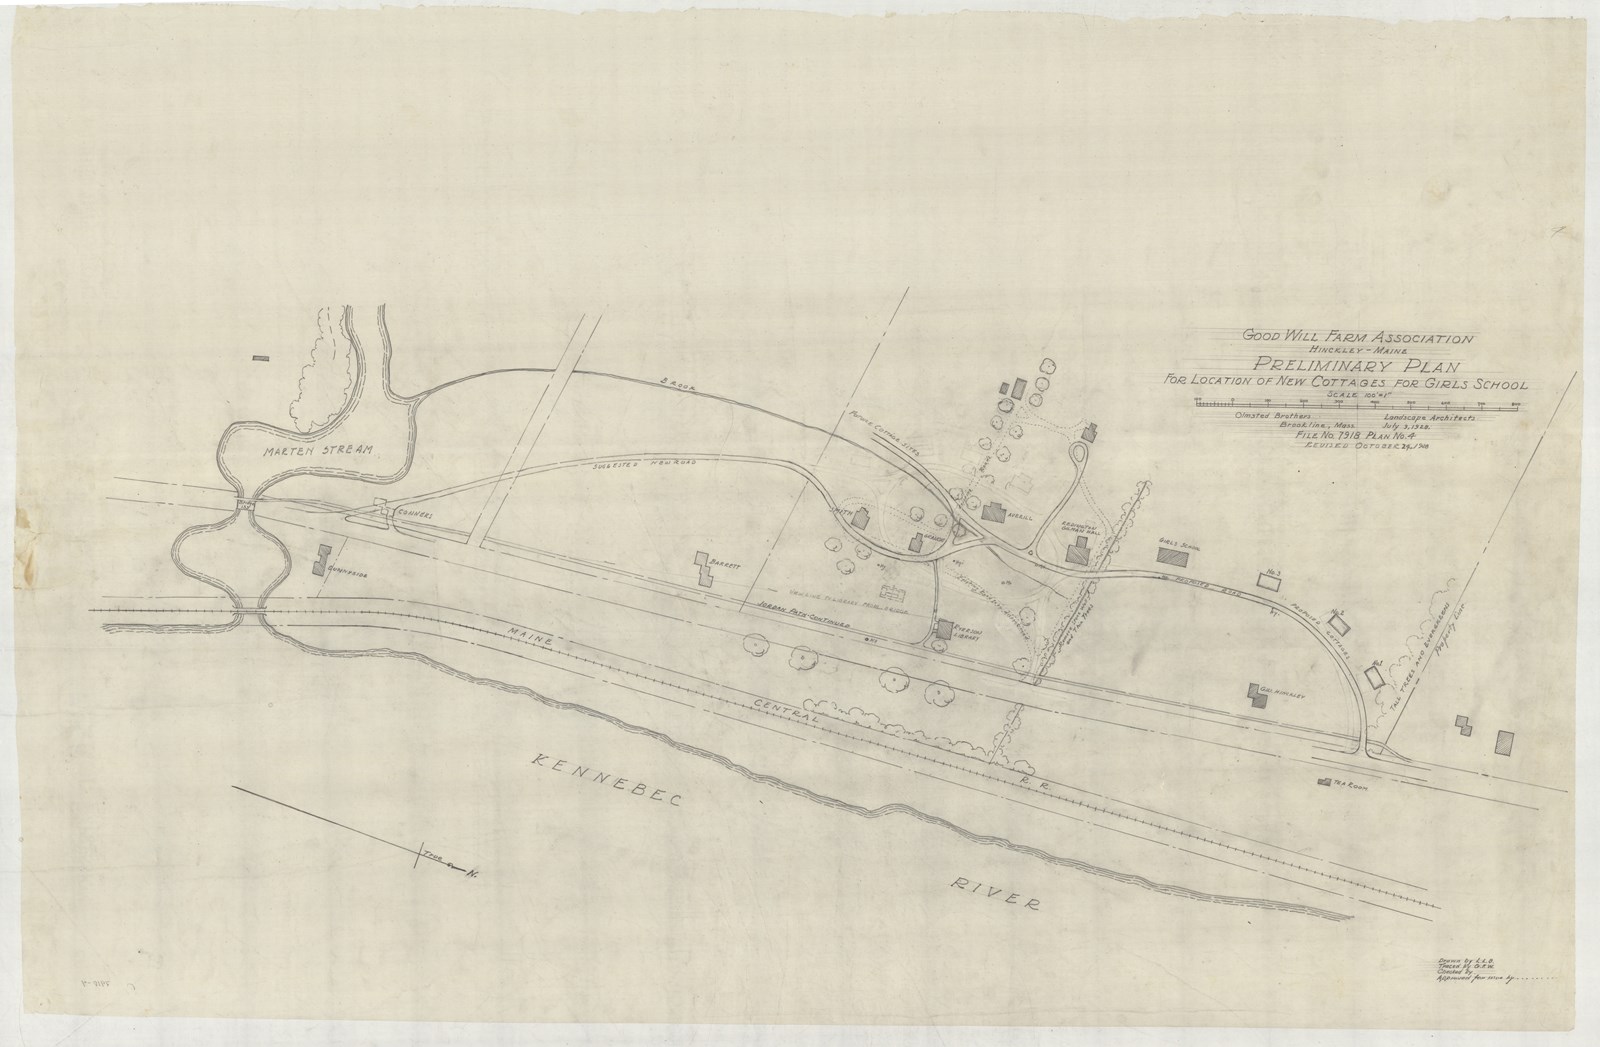 Plan of road with curving road and buildings around and some trees 